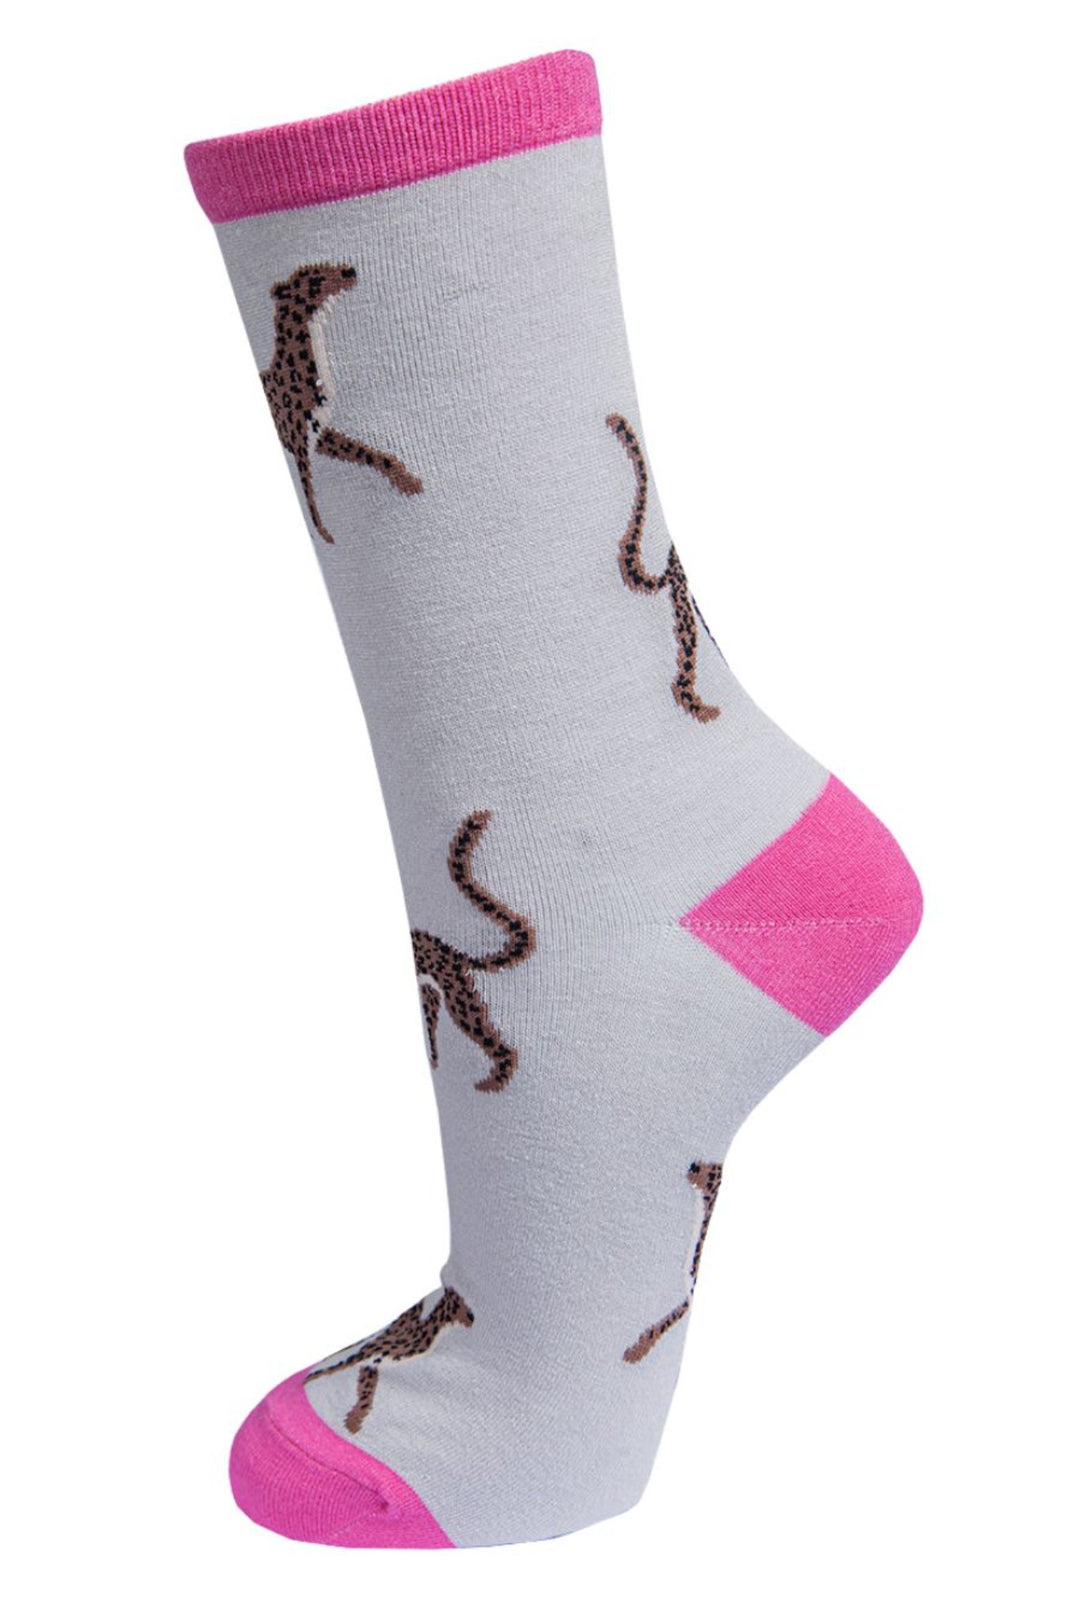 grey socks with pink heel, toe and cuff with a pattern of cheetah cats